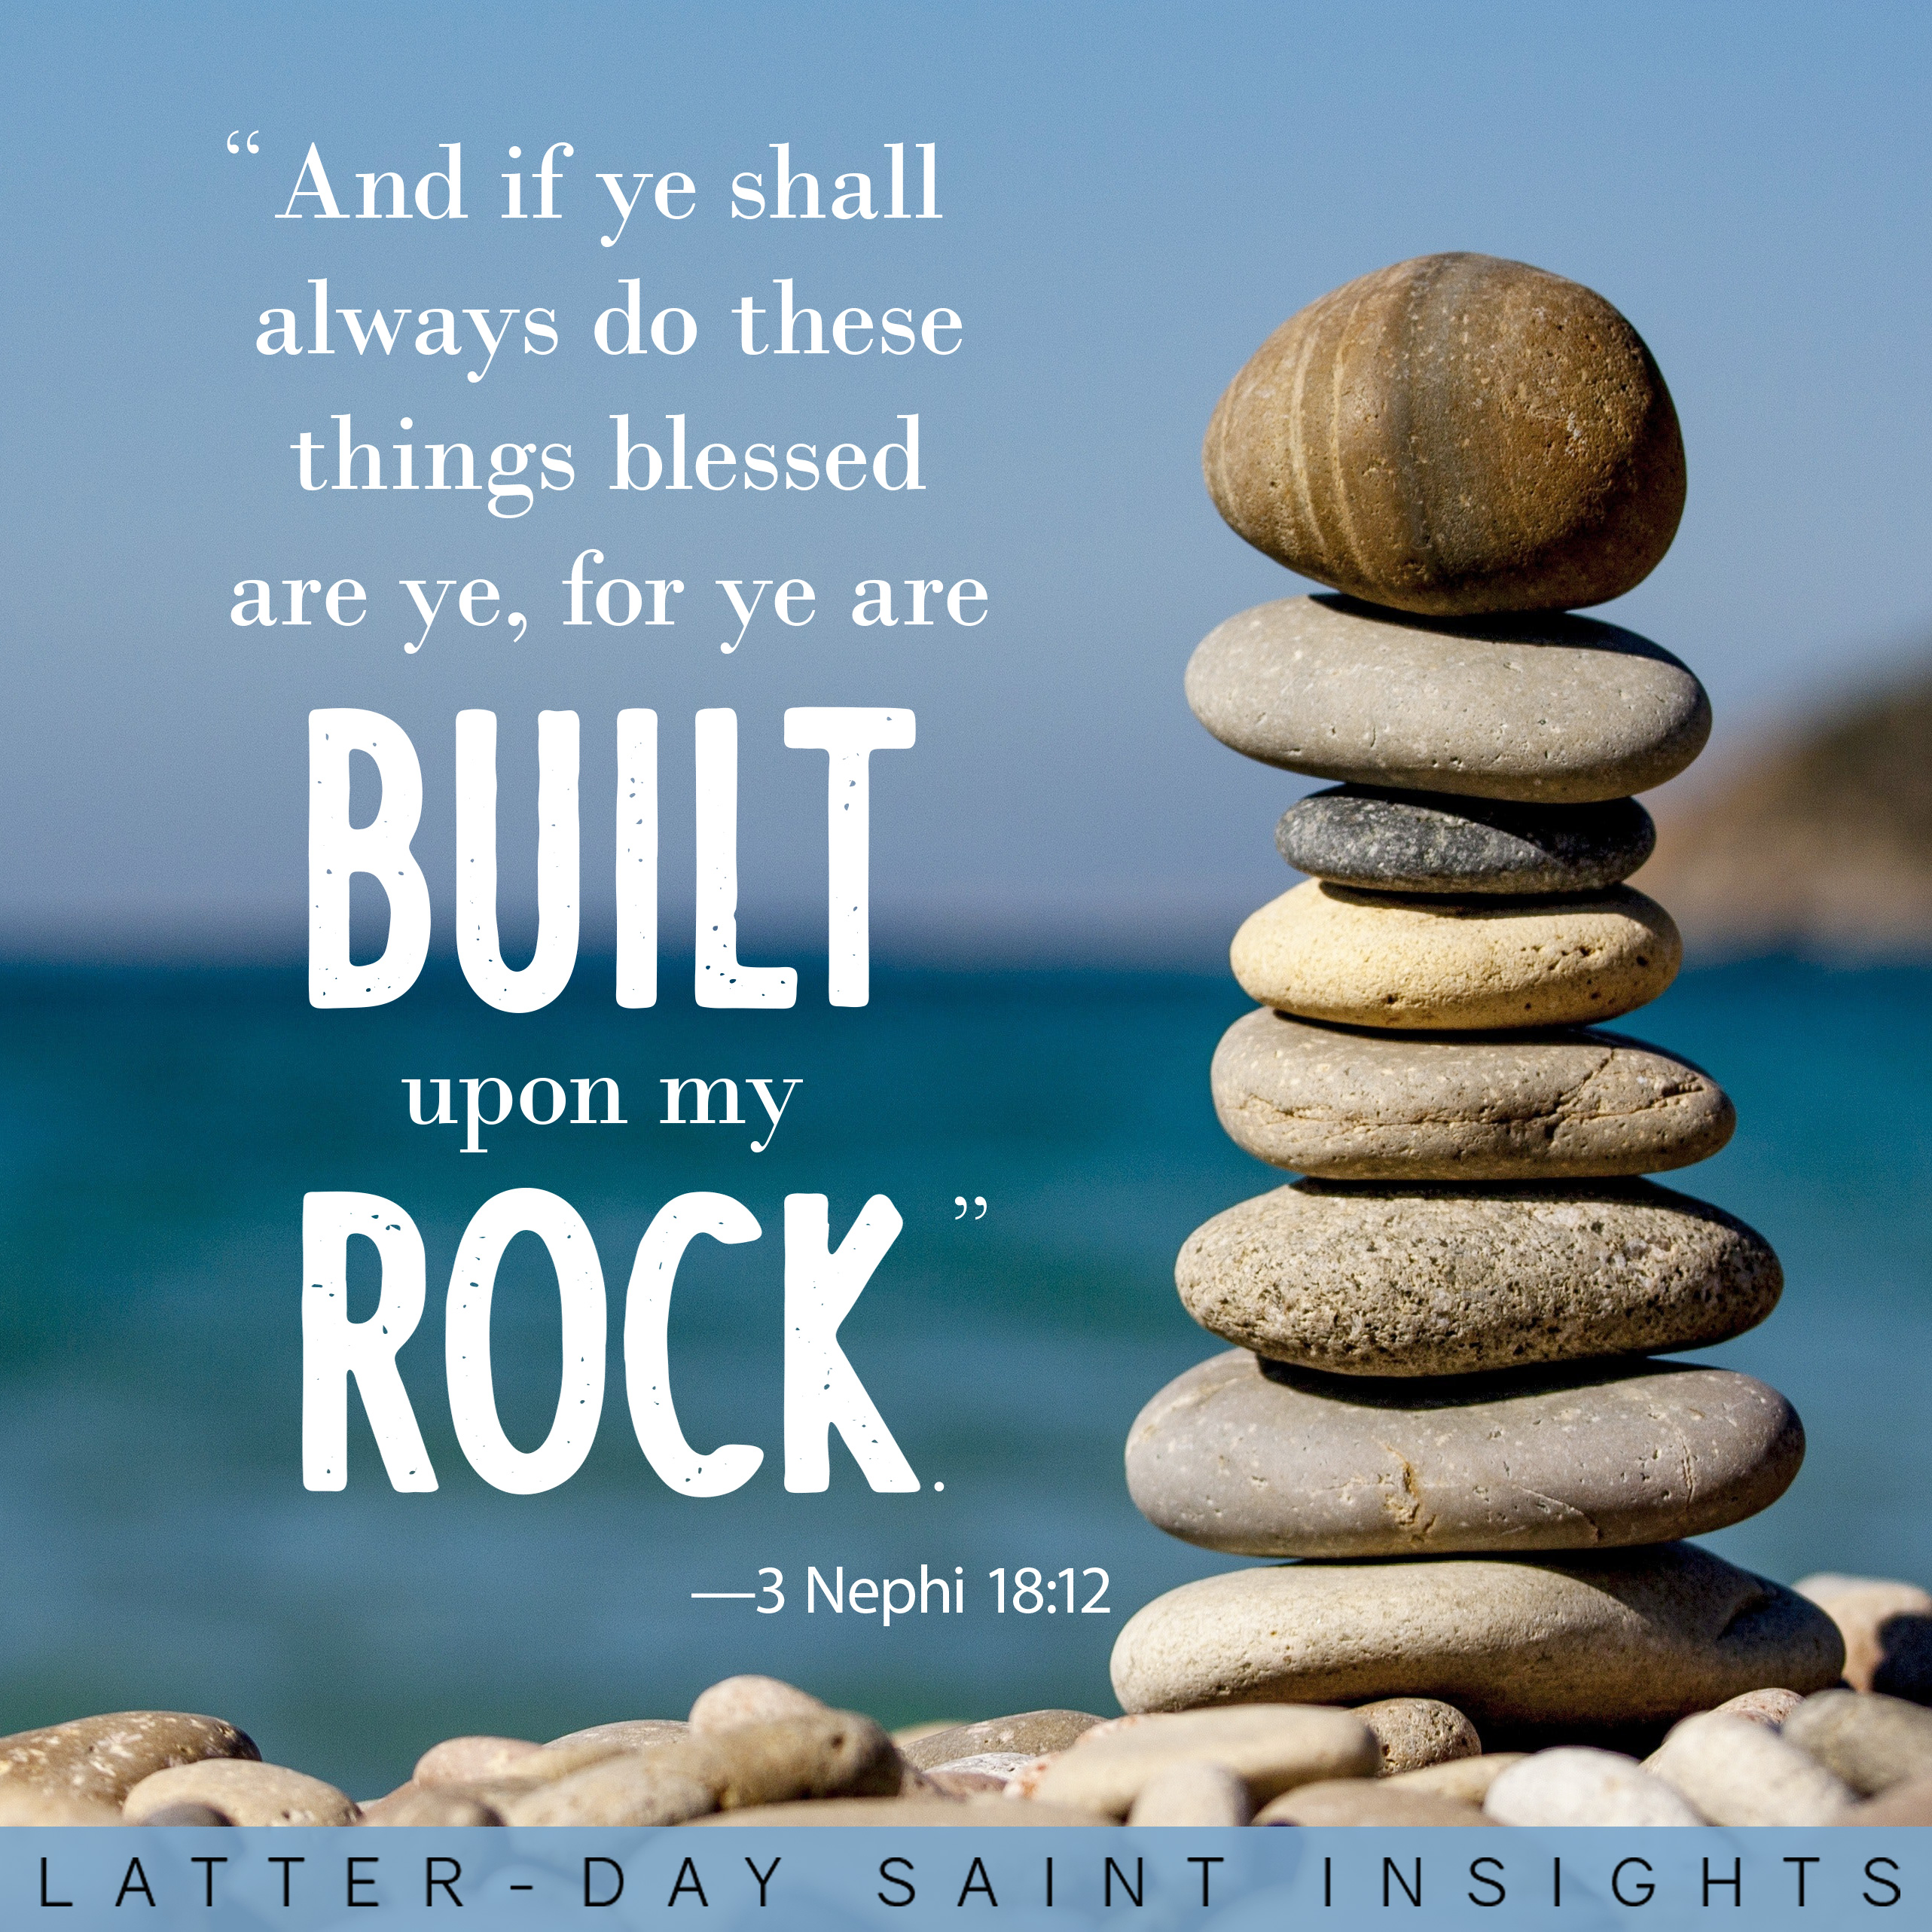 A cairn of ocean pebbles with a quote from 3 Nephi 18:12 that says, "And if ye shall always do these things blessed are ye, for ye are built upon my rock."